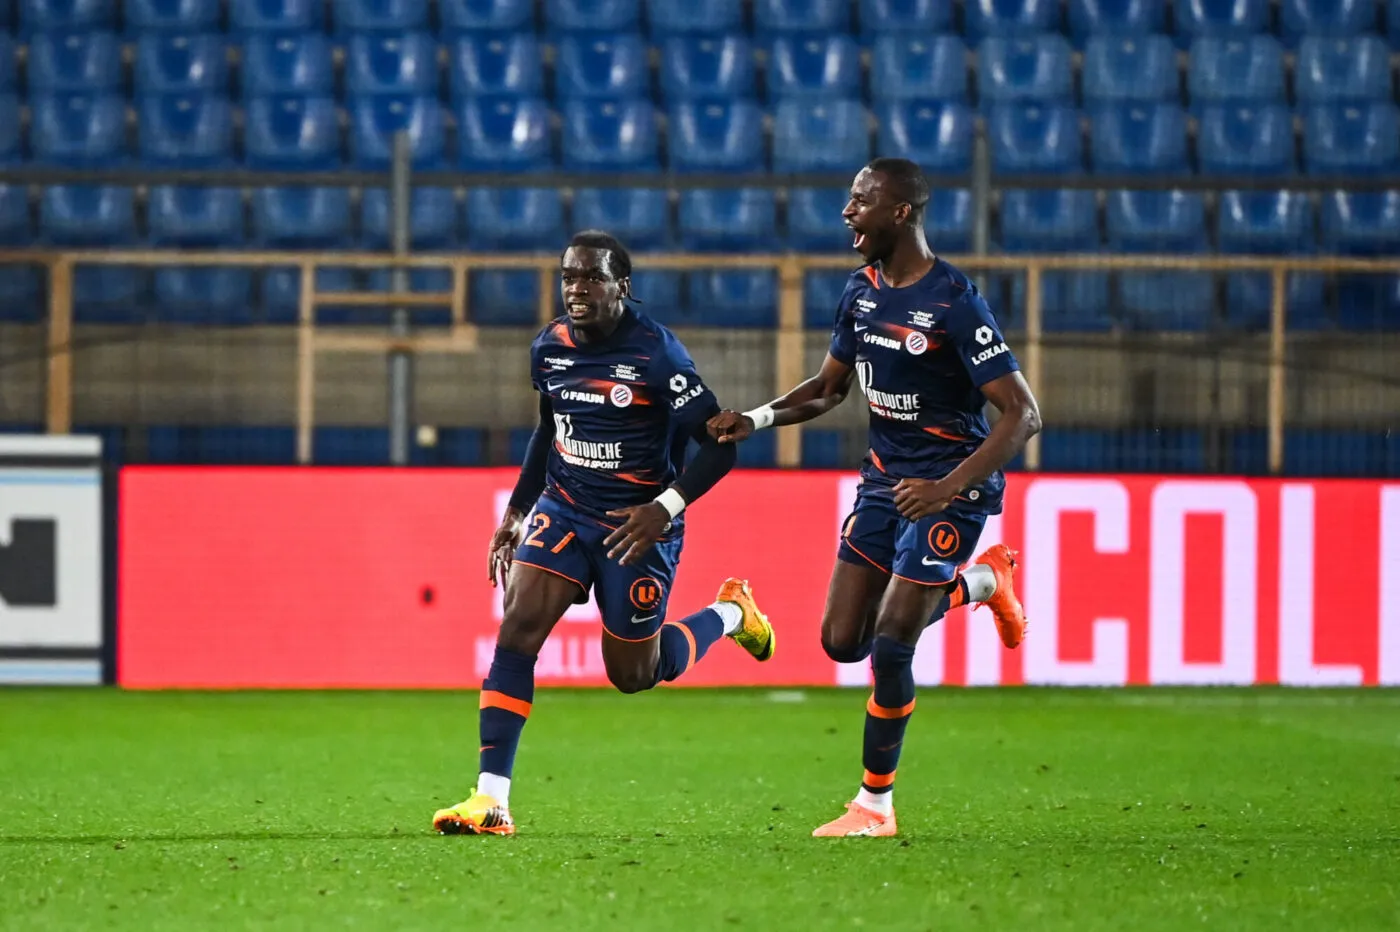 Faitout MAOUASSA of Montpellier during the Ligue 1 Uber Eats match between Montpellier and Lens at Stade de la Mosson on February 25, 2023 in Montpellier, France. (Photo by Alexandre Dimou/Alexpress/Icon Sport)